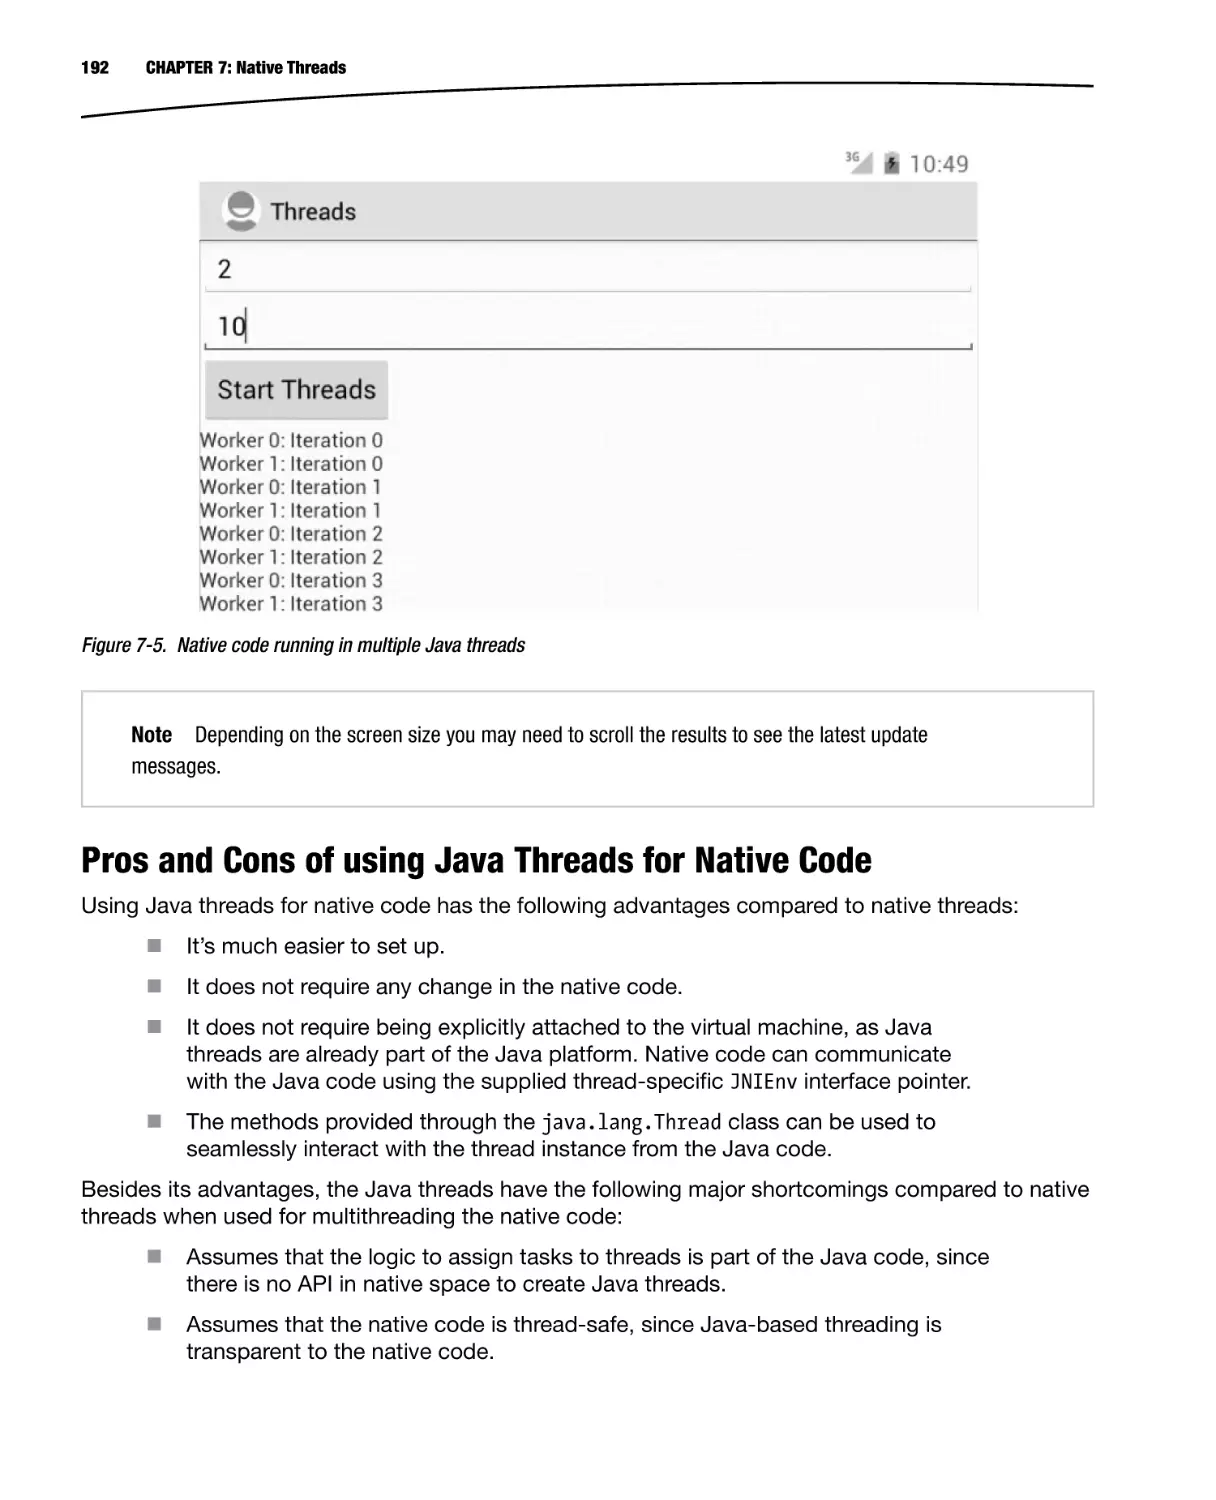 Pros and Cons of using Java Threads for Native Code